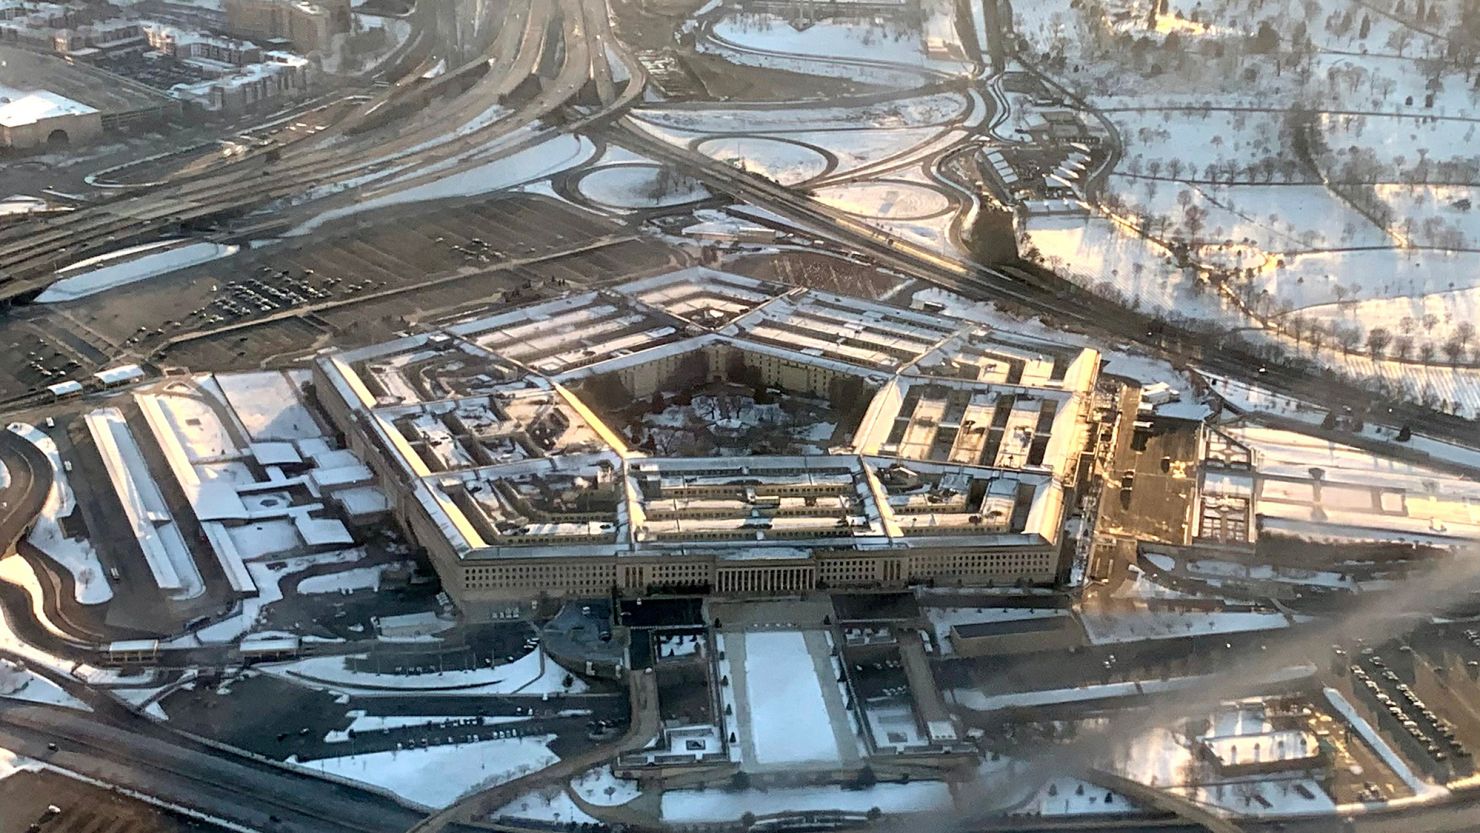 This March 12, 2022, aerial image shows the Pentagon (US Department of Defense) in Washington, DC. (Photo by Eva HAMBACH / AFP) (Photo by EVA HAMBACH/AFP via Getty Images)